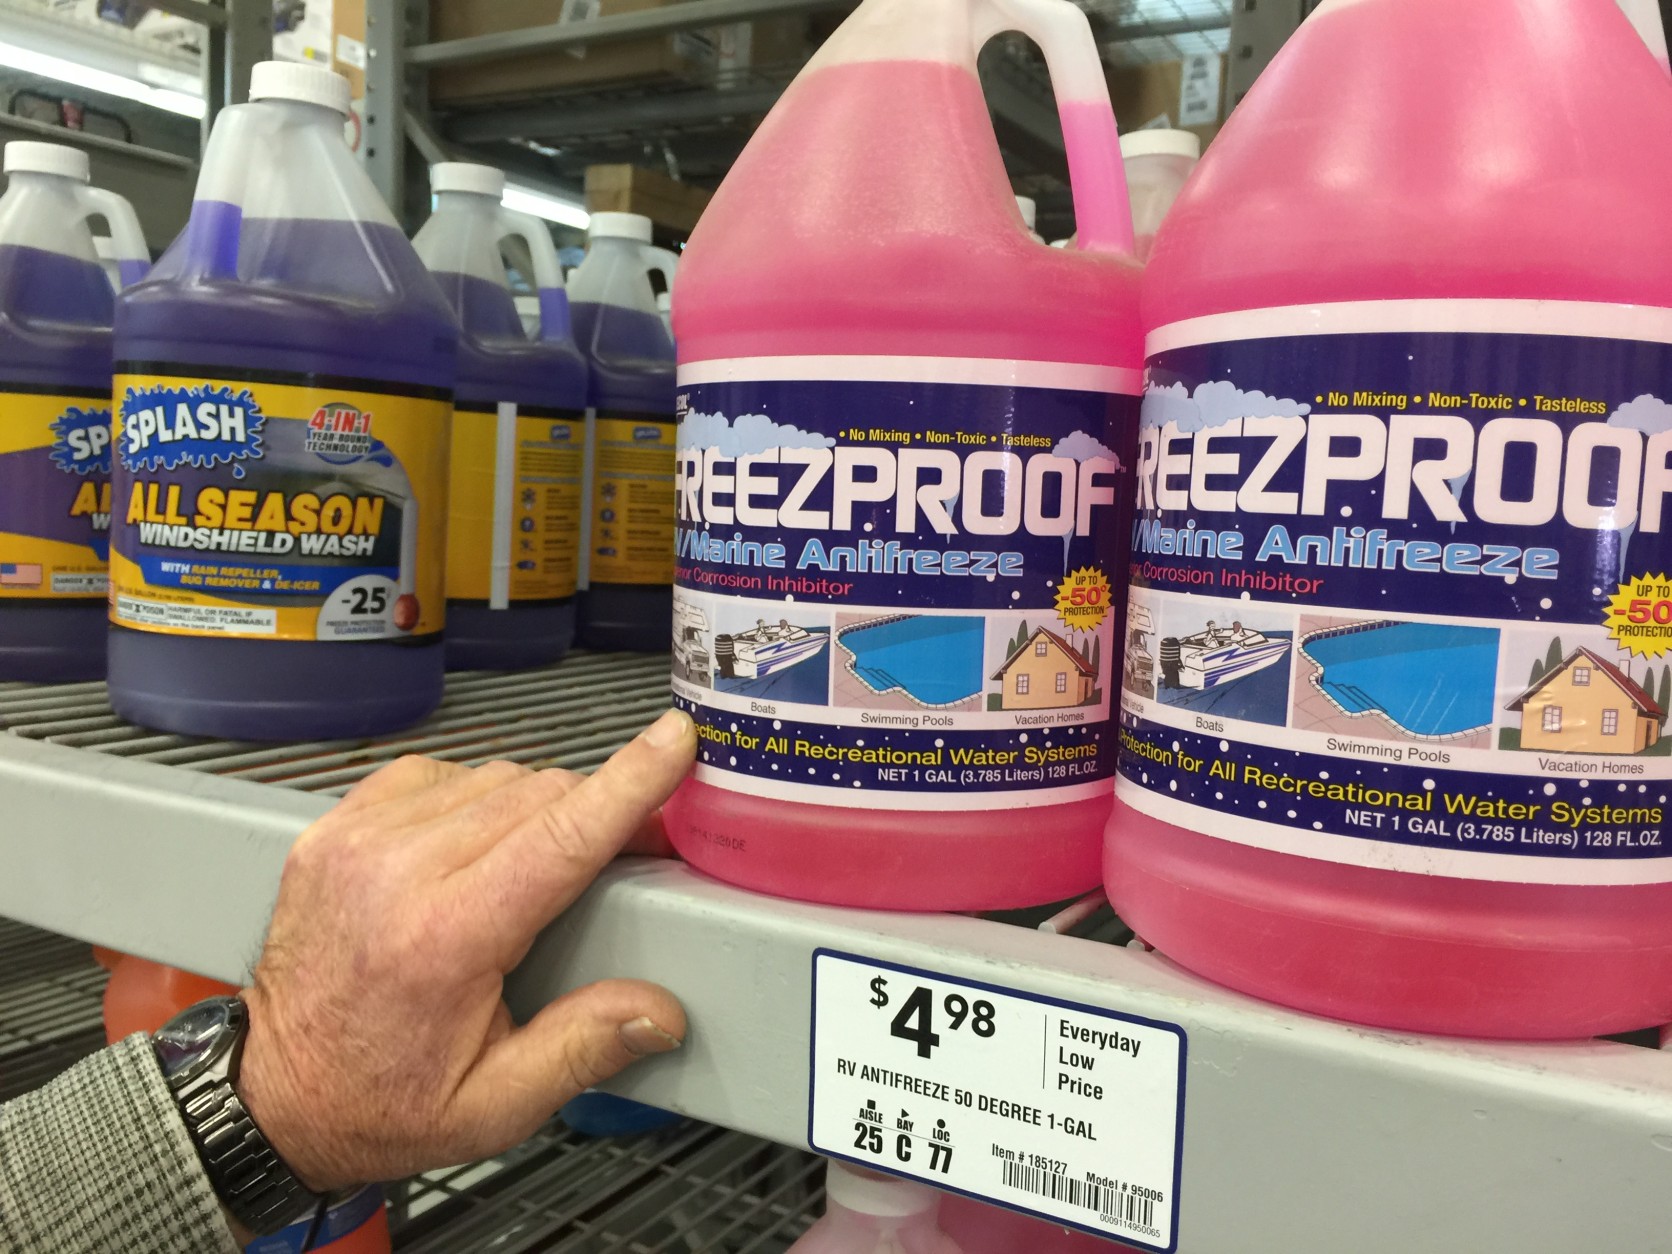 Using anti-freeze designed for boats and RV's is recommended for drains in exterior stairwells leading to basements. 
 
"If you don't, that water starts melting and getting up in there and that drain clogs [then] it's going to get up above your door levels and go right up on in the house, " says Lowe's Department Manager Larry Schultz. 
 
Products such as "Freezproof" are bio-degradable and environmentally friendly.
